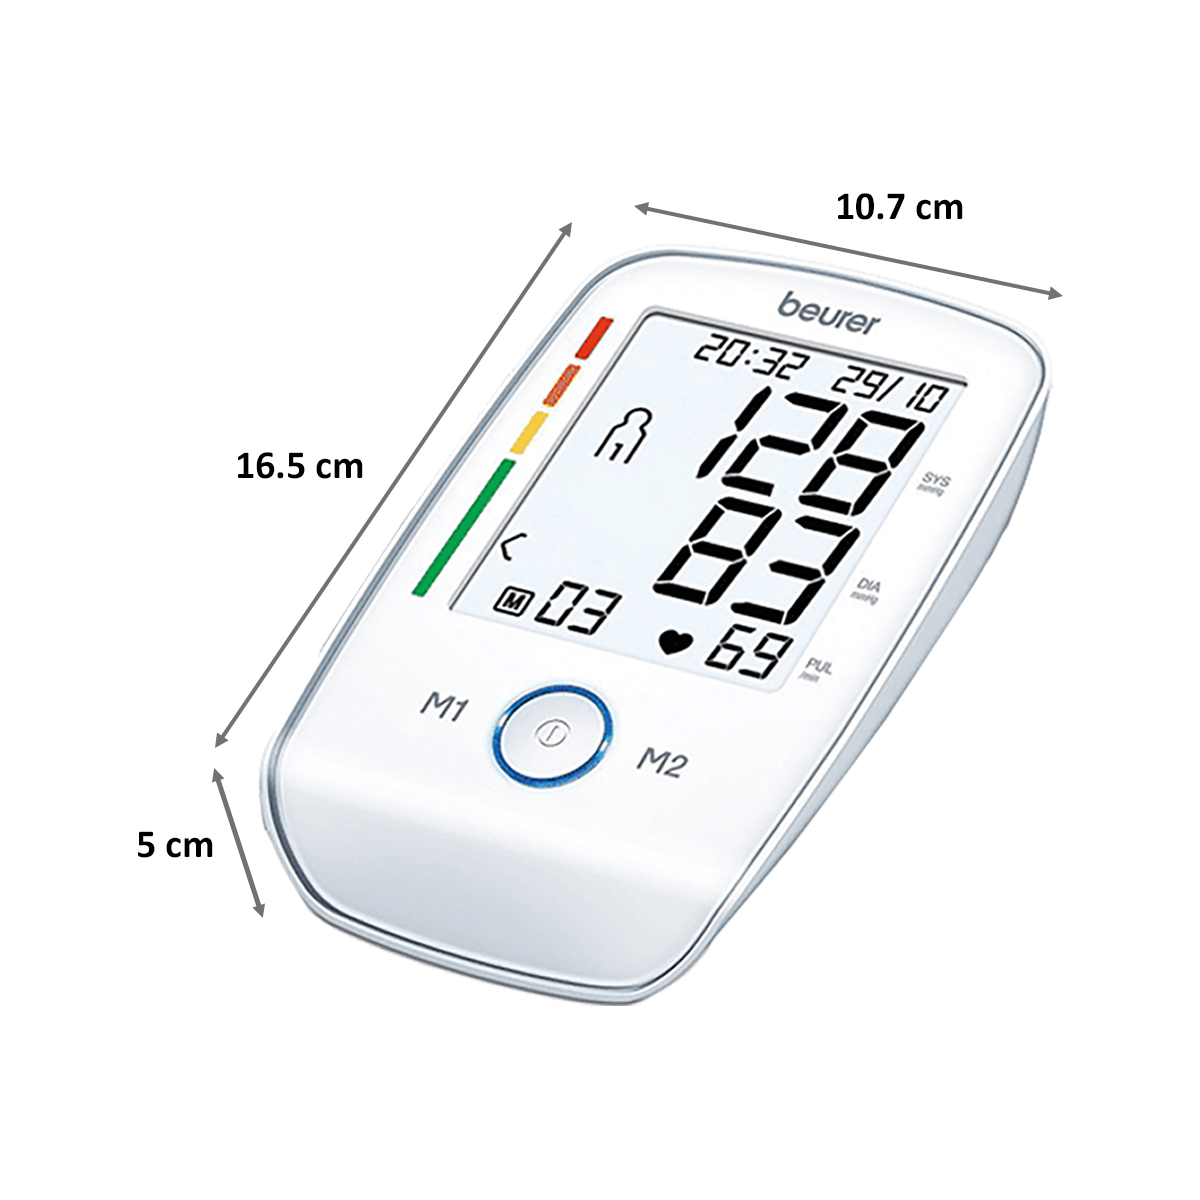 Beurer BM 45 Upper Arm Blood Pressure Monitor (Automatic Blood Pressure and Pulse Measurement, White)_2